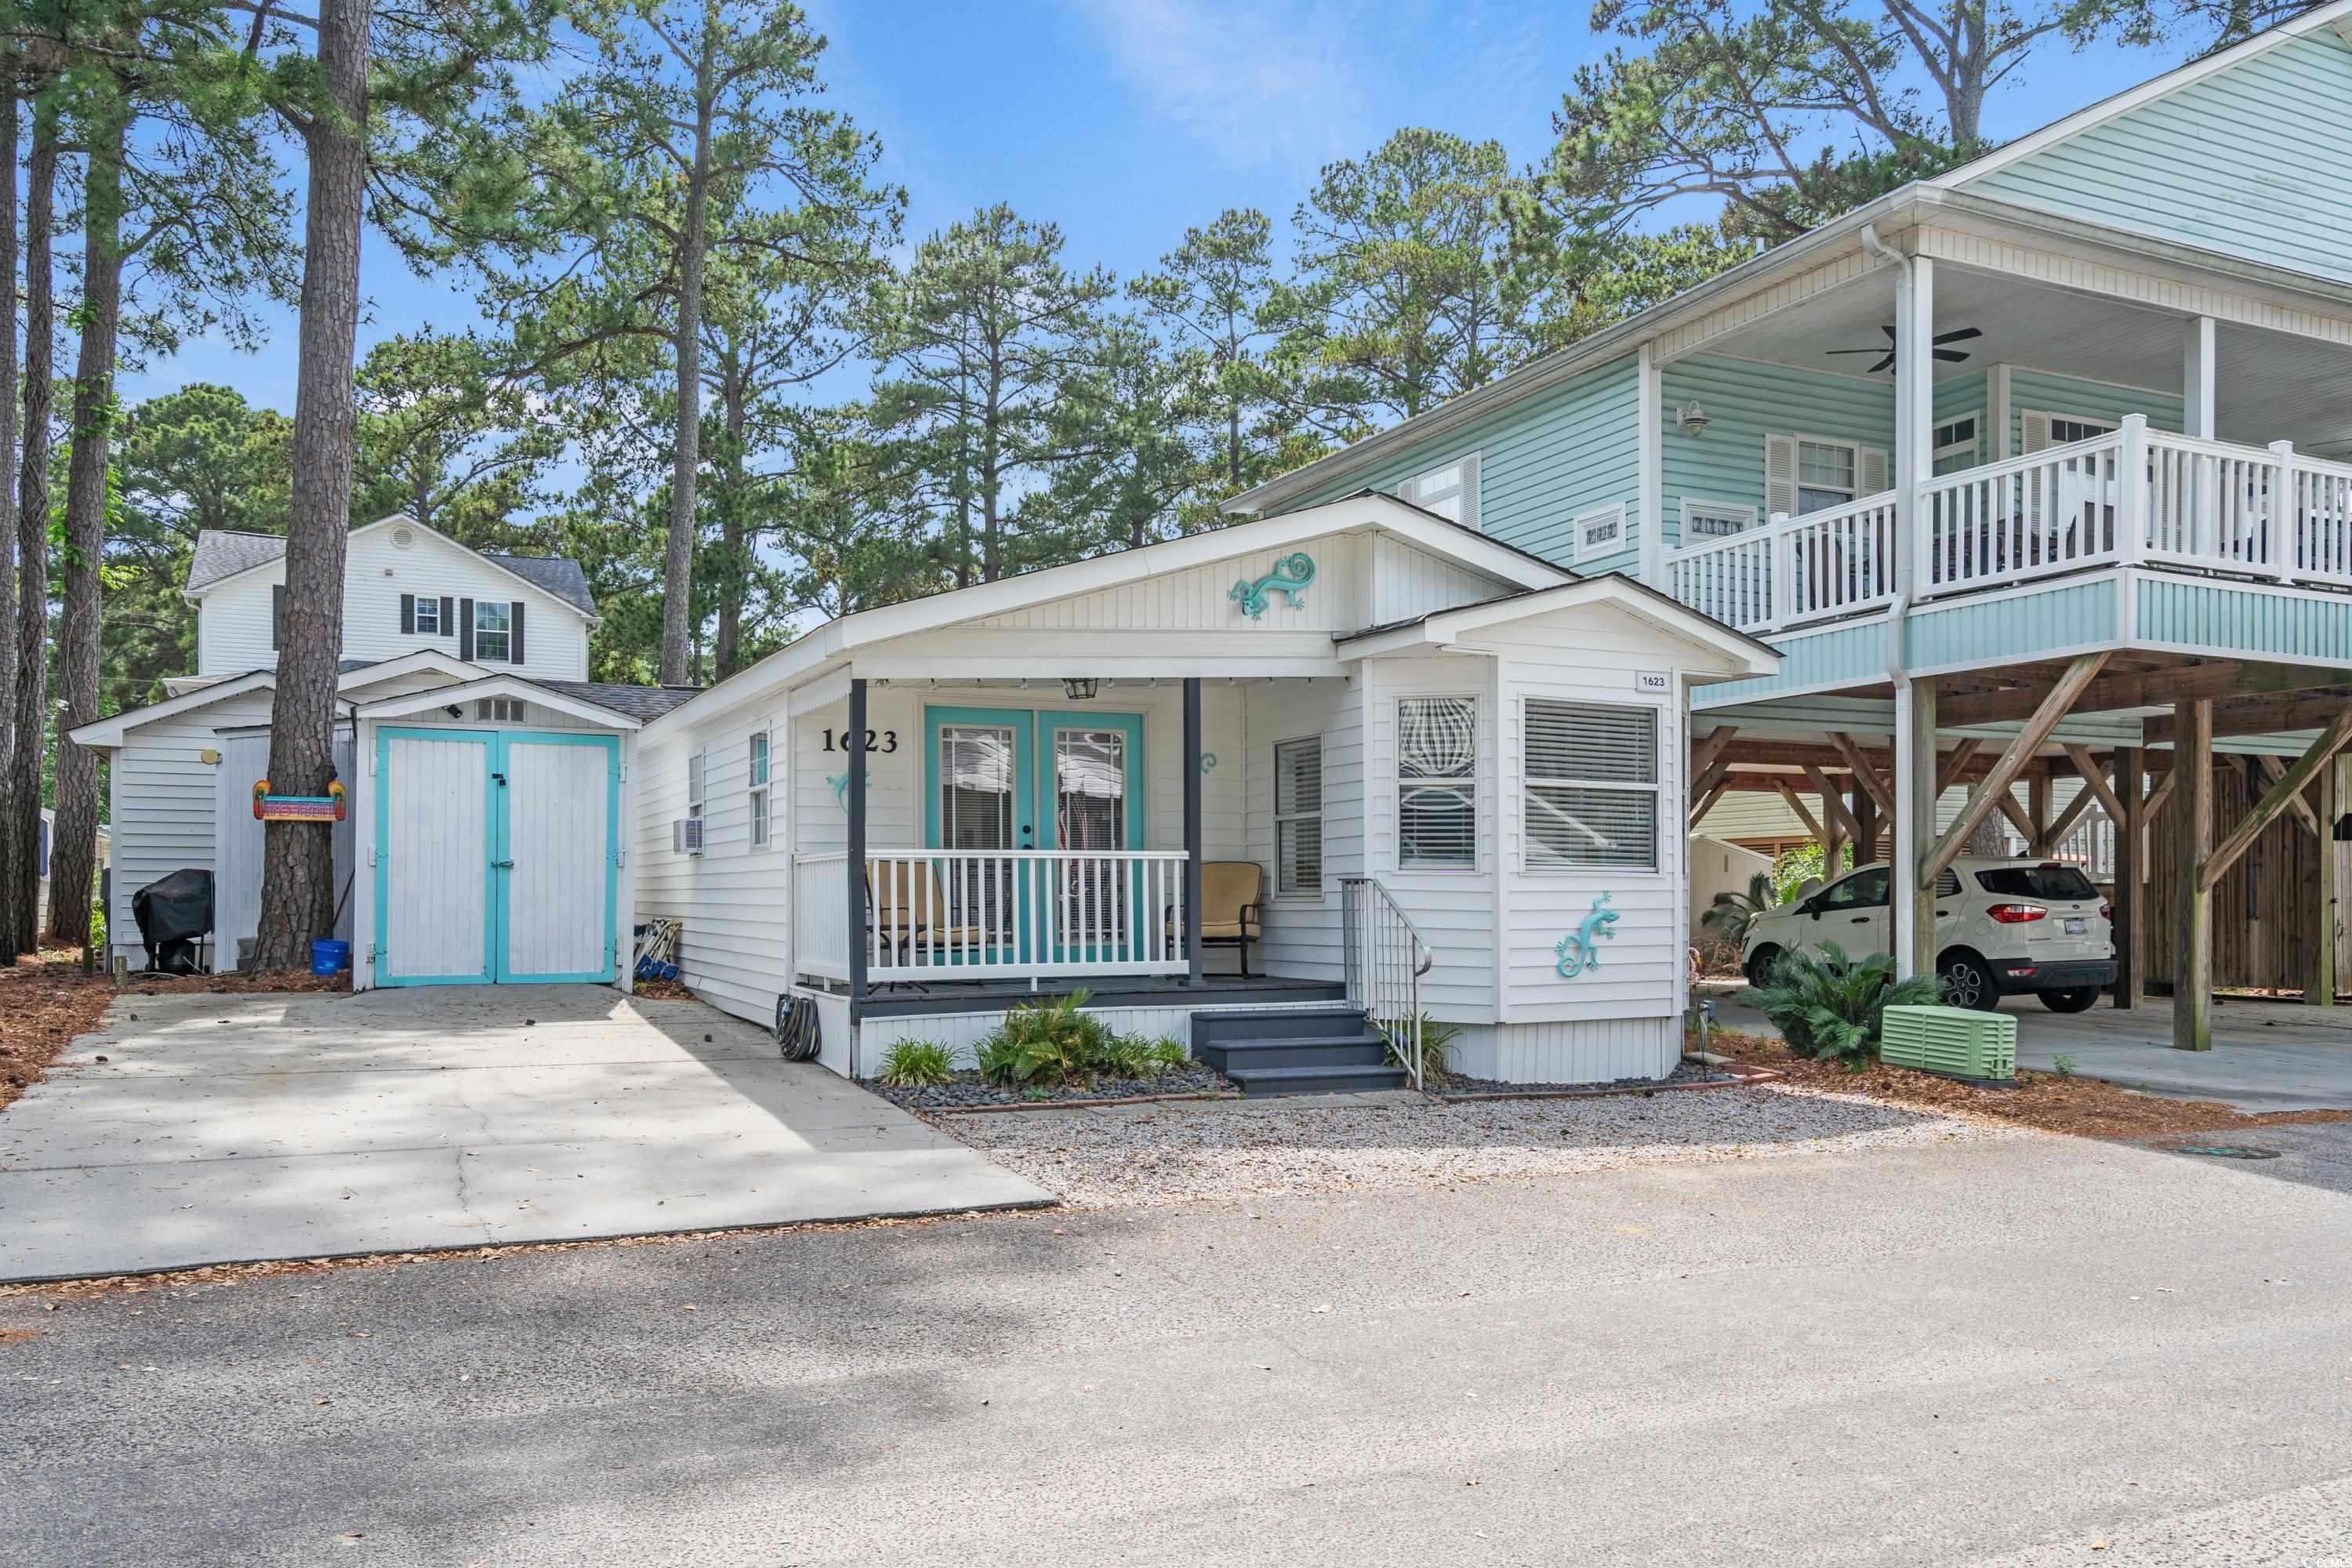 motivated seller. welcome to your coastal retreat at ocean lakes campground, the premier vacation community. we present a recently remodeled gem boasting 2 bedrooms, 1 full bathroom, and 1 half bathroom, ensuring comfort and style for your beachside escape. the living area provides a perfect spot to unwind, offering a harmonious balance of natural light and coastal vibes. retreat to the master bedroom, which is just off the family room, with no steps to contend with. the second bedroom is versatile, ideal for guests or transforming into a home office for remote work with a view of the lush surroundings.  as a resident of ocean lakes, you'll enjoy an array of amenities that make everyday life feel like a vacation. dive into fun at the water park, perfect for family outings and cooling off on warm summer days. rest easy with 24/7 security, providing peace of mind for you and your loved ones.  indulge in the beauty of nature with a full mile of community beach access just steps away. whether you're a beachcomber, sunbather, or surfer, the pristine shores are your playground. challenge guests to a round of mini golf or grab essentials at the convenient on-site mini-mart.